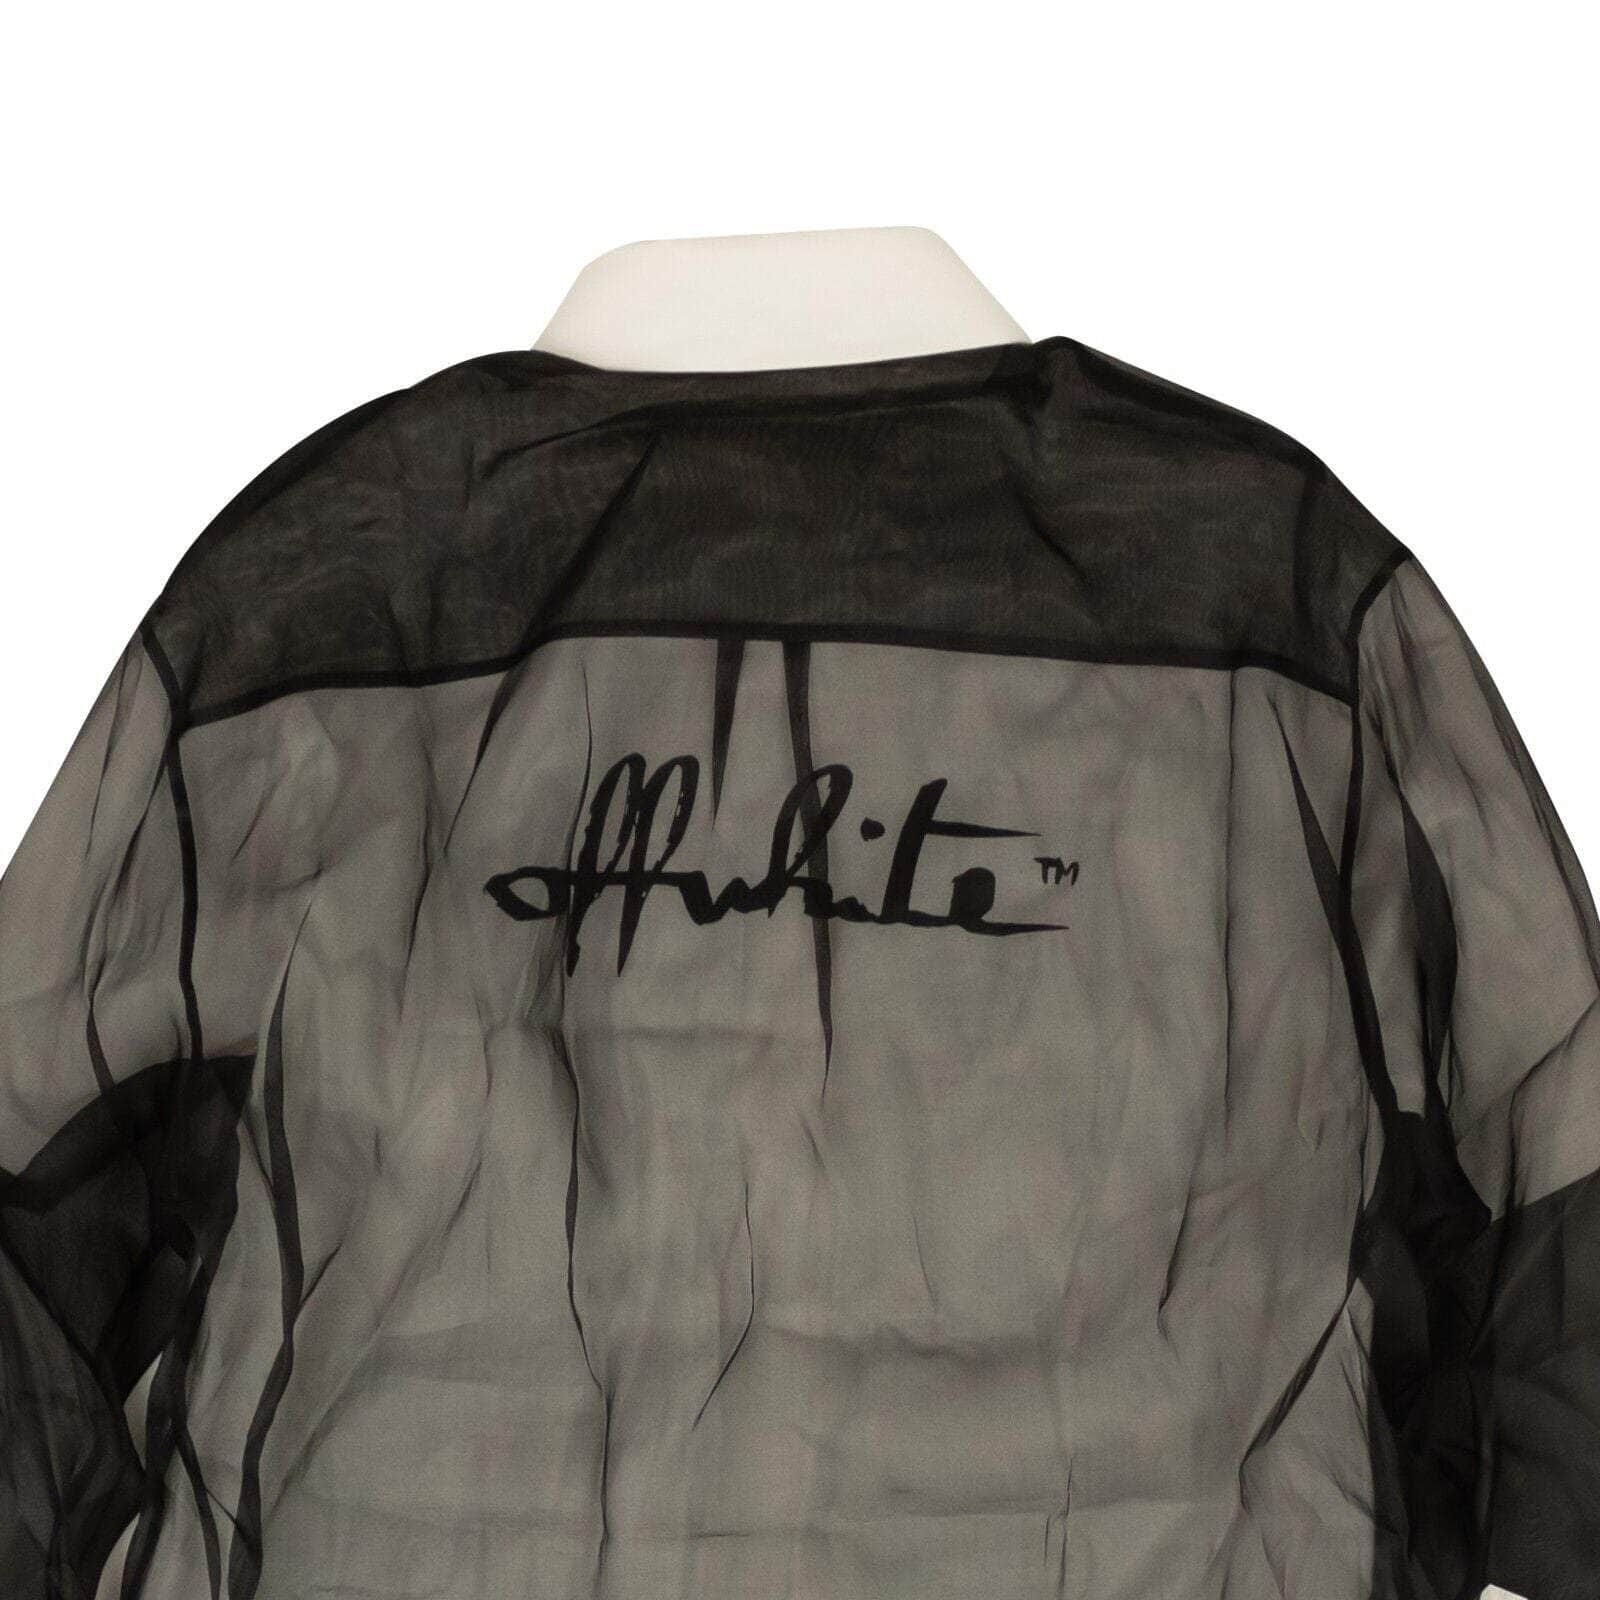 Off-White c/o Virgil Abloh 250-500, channelenable-all, chicmi, couponcollection, gender-womens, main-clothing, off-white-c-o-virgil-abloh, size-42, SPO, womens-blouses 42 Black And White Double Layer Shirt 95-OFW-1796/42 95-OFW-1796/42